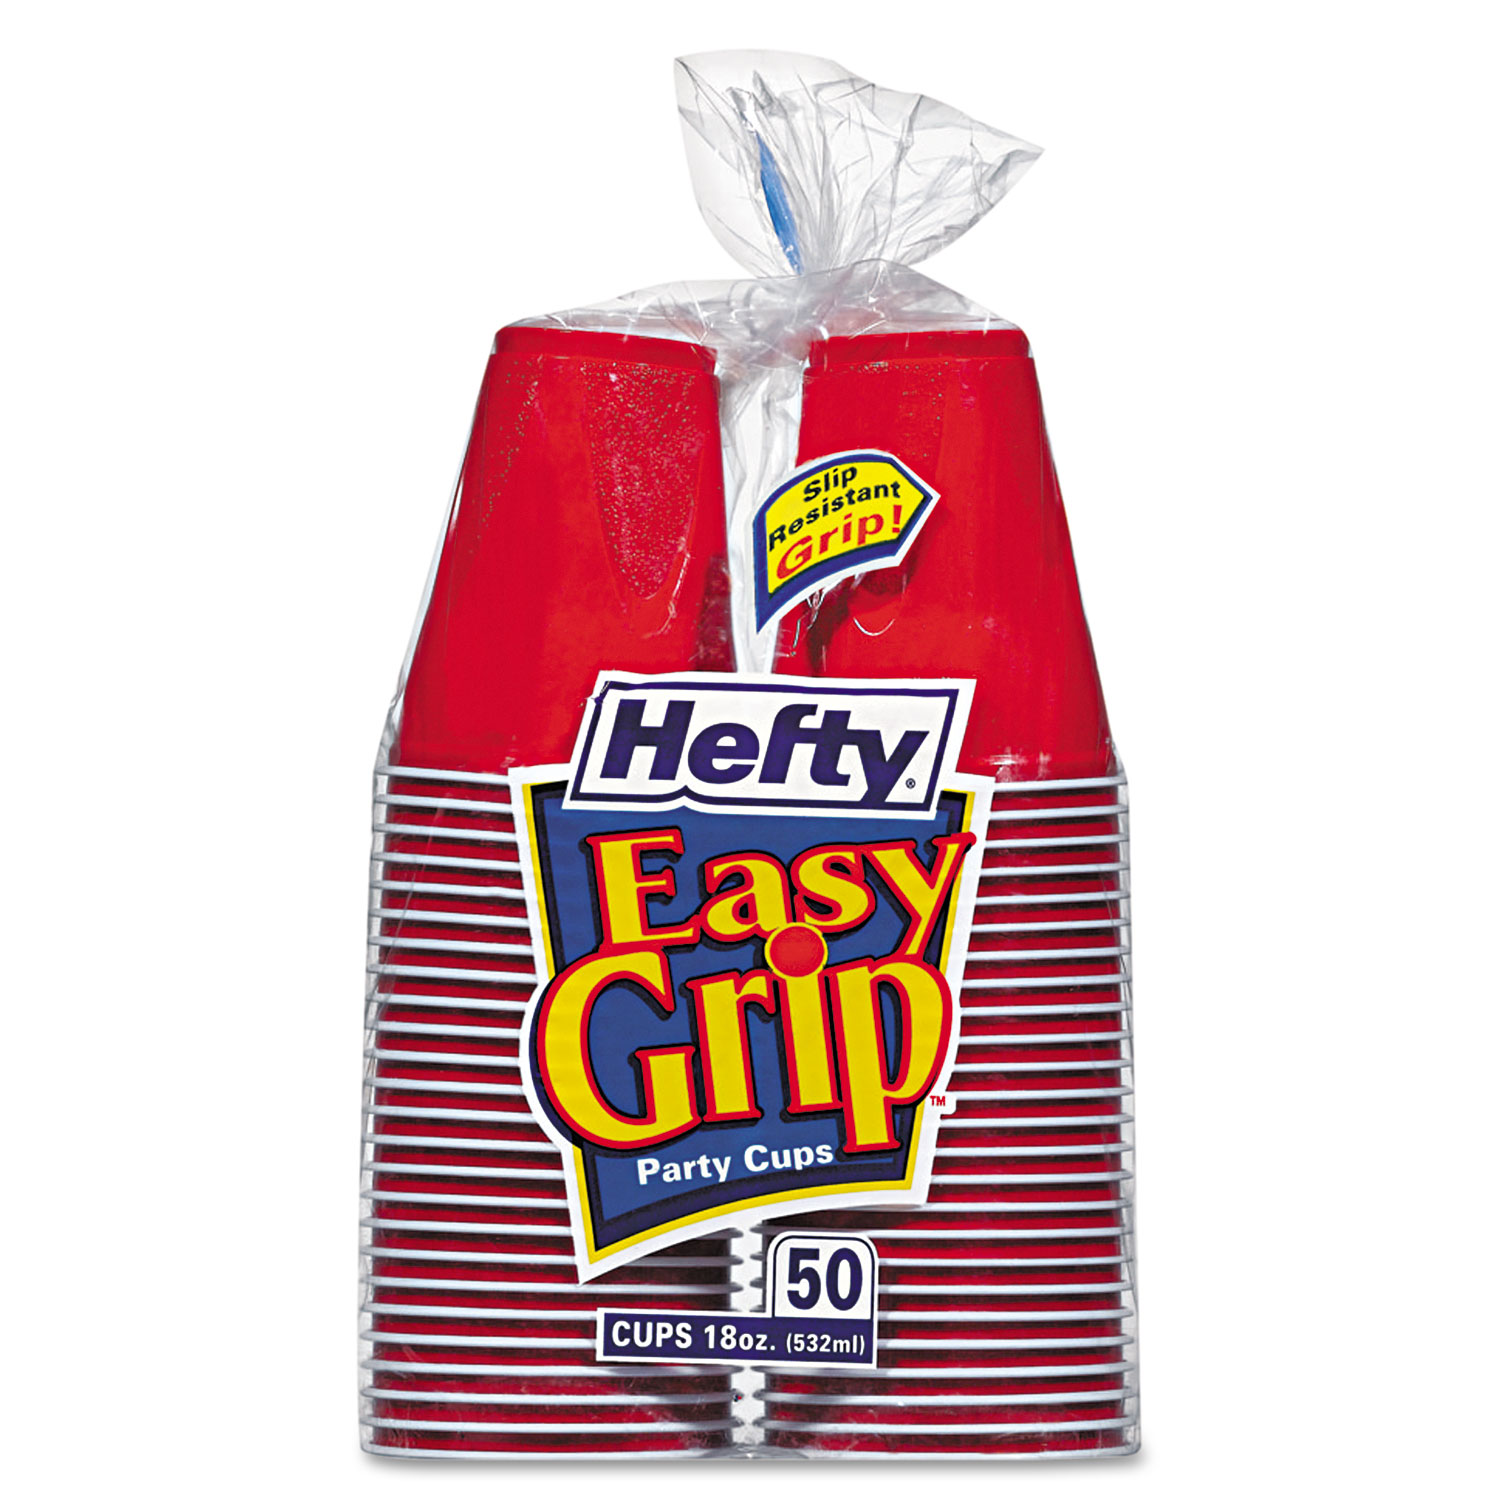  Hefty C21999 Easy Grip Disposable Plastic Party Cups, 18 oz, Red, 50/Pack (RFPC21999) 